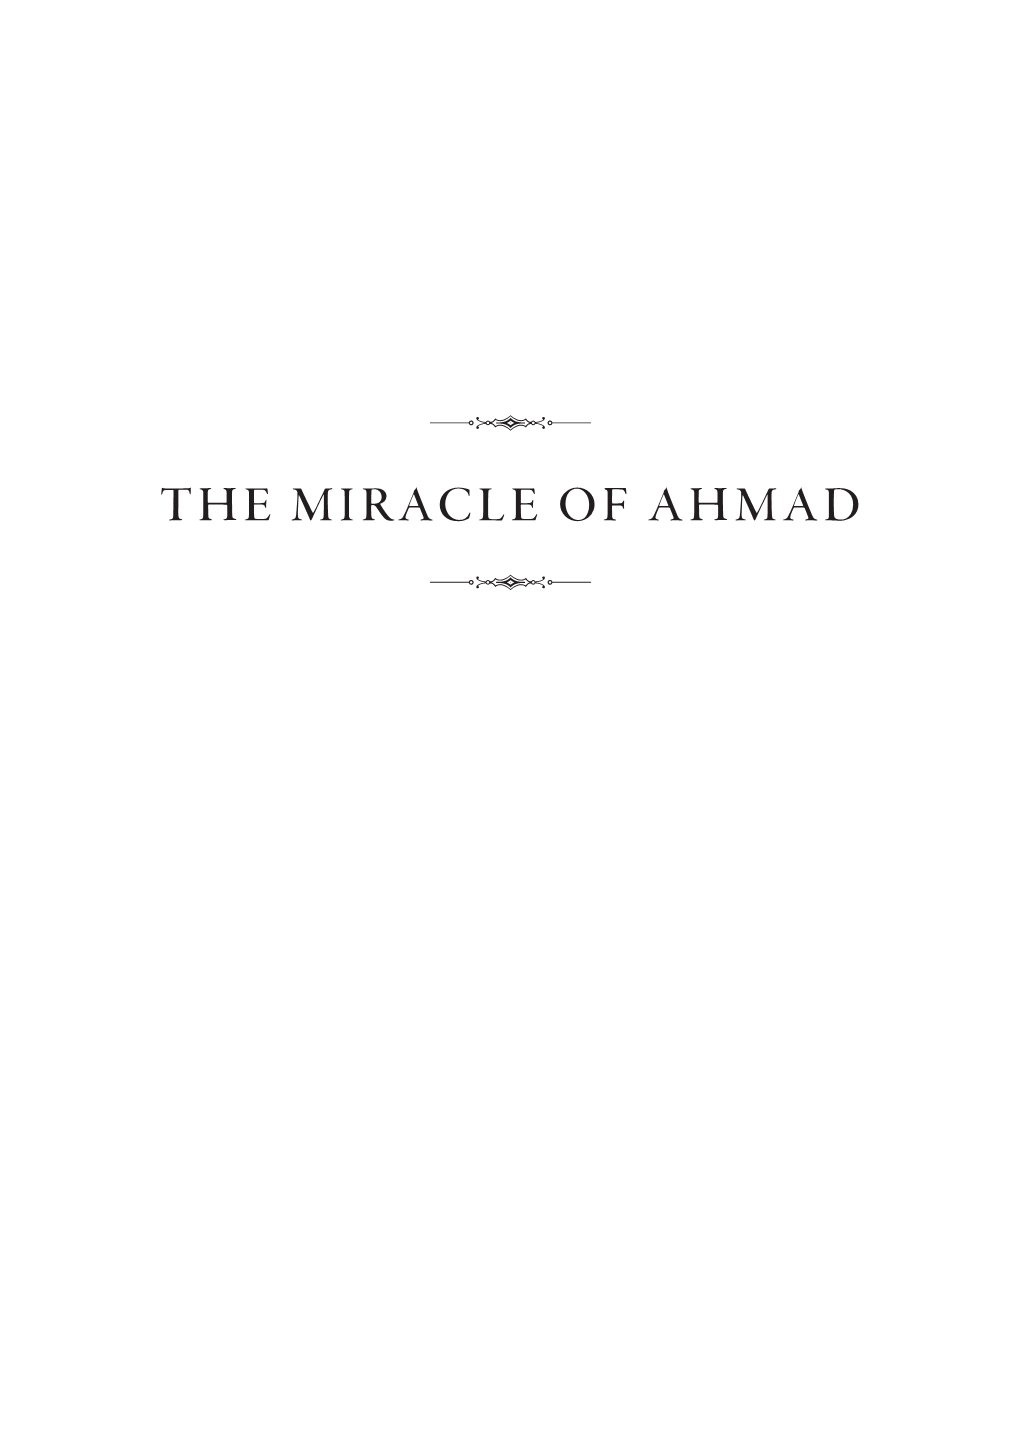 The Miracle of Ahmad